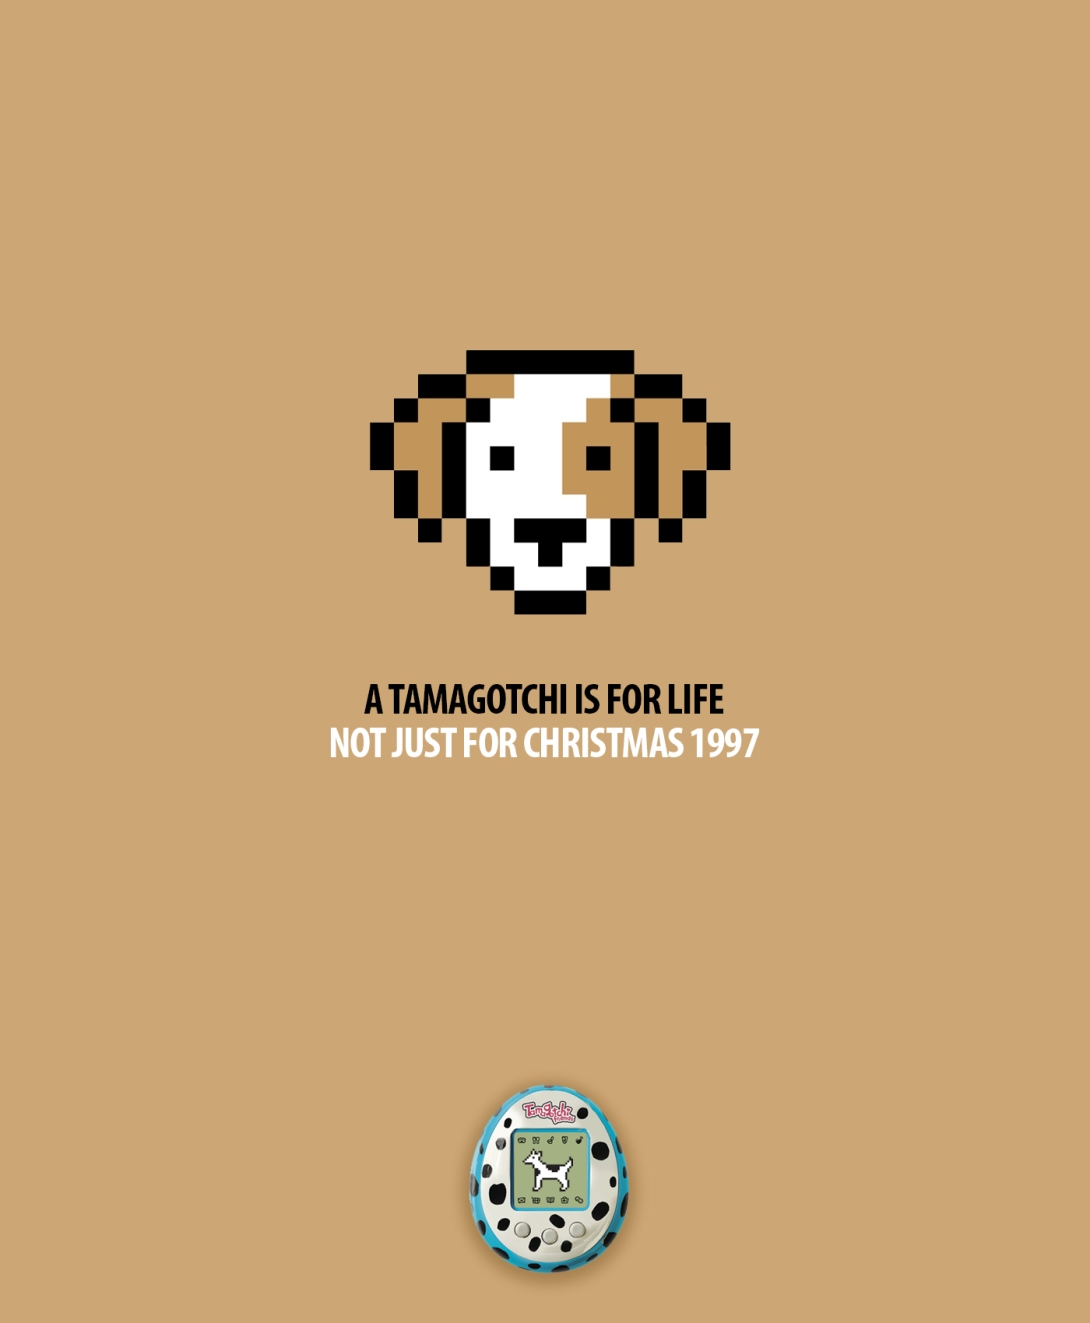 Tamagotchi advertising concept - A Tamagotchi is for life, not just for Christmas 1997